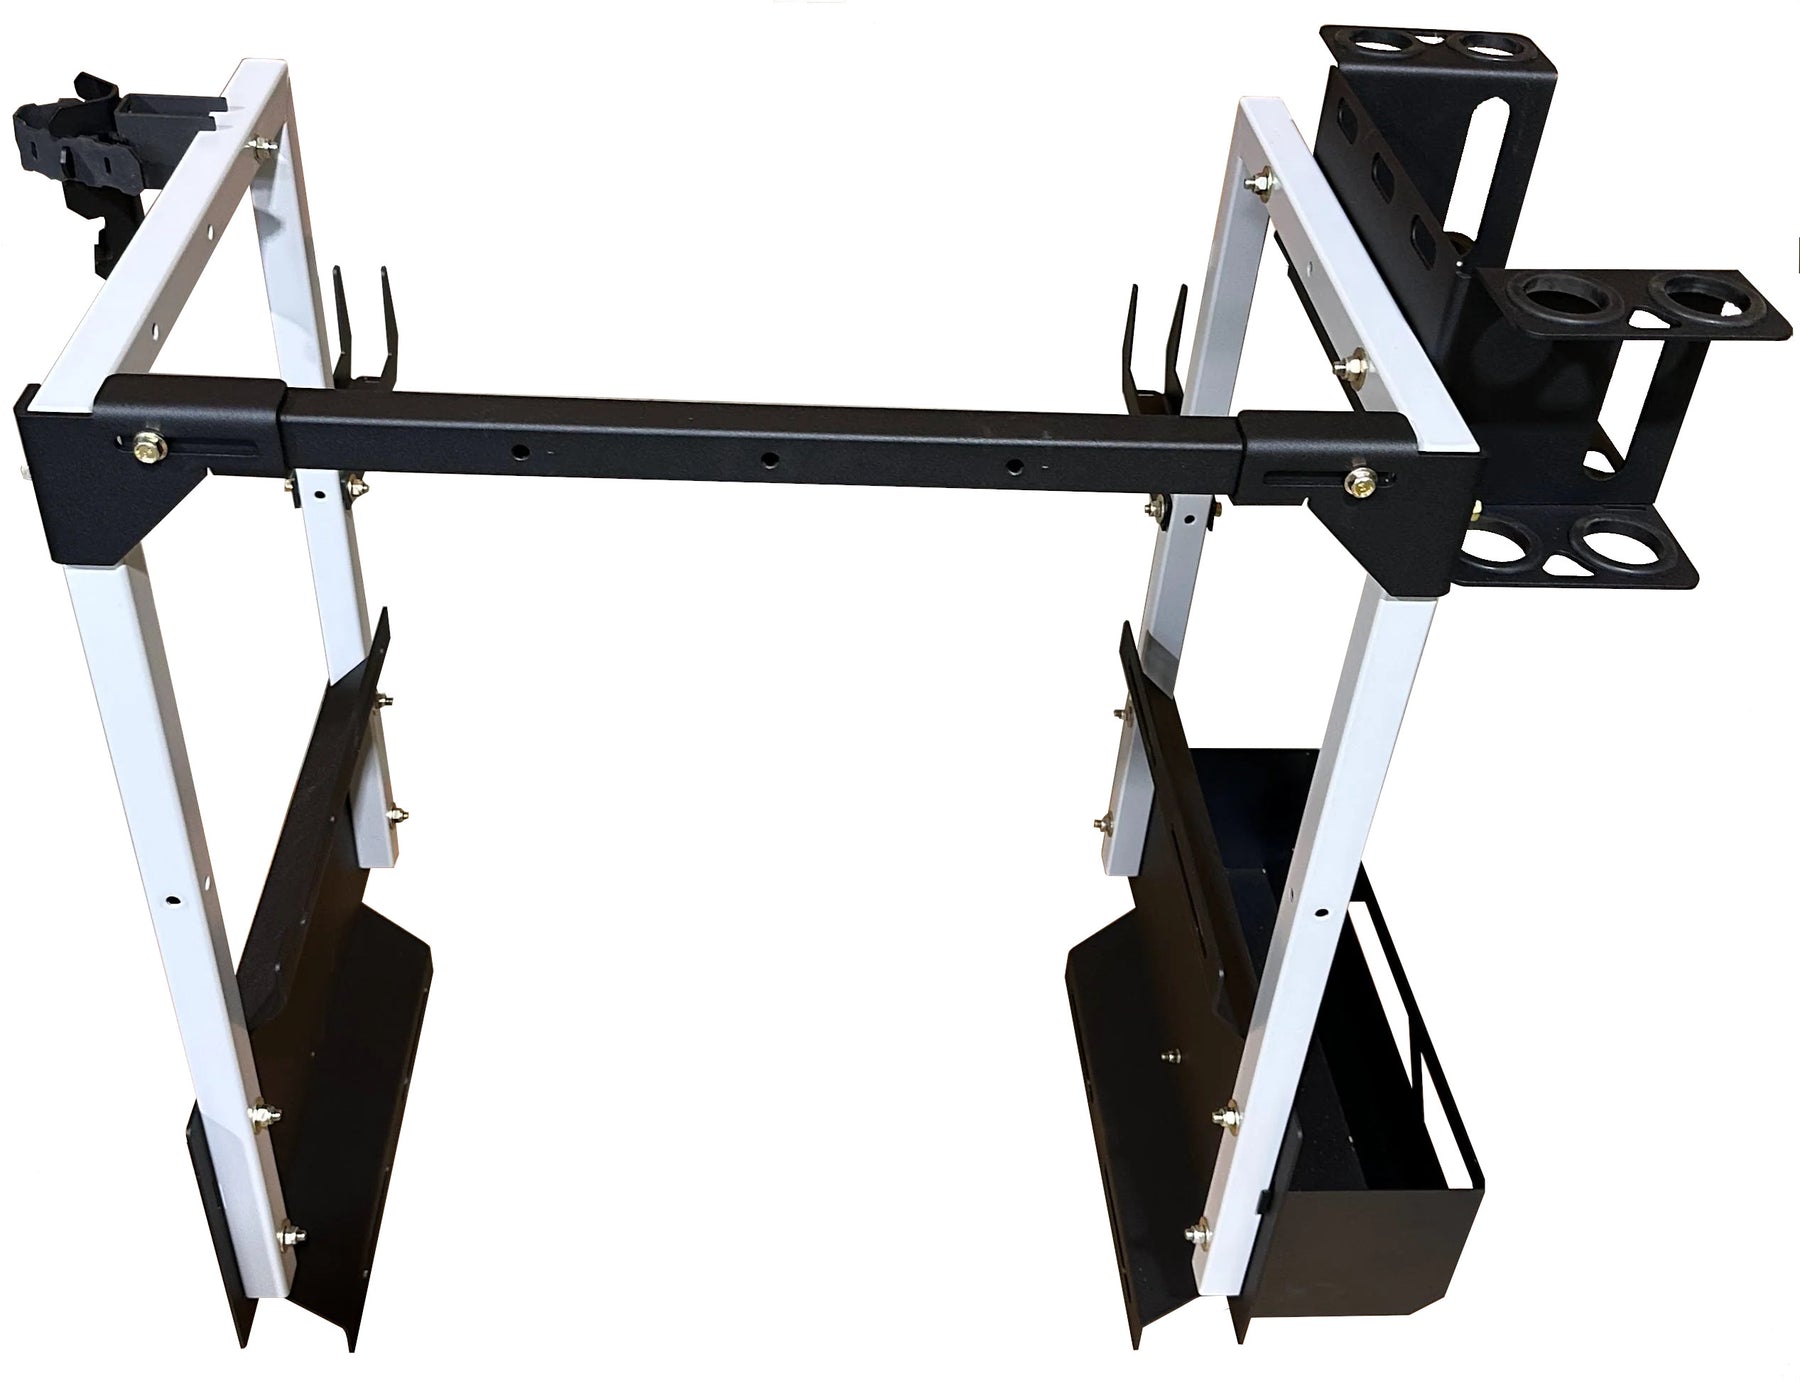 Standard Ballast Box Tool Rack System By Bigtoolrack (IN STOCK NOW)!